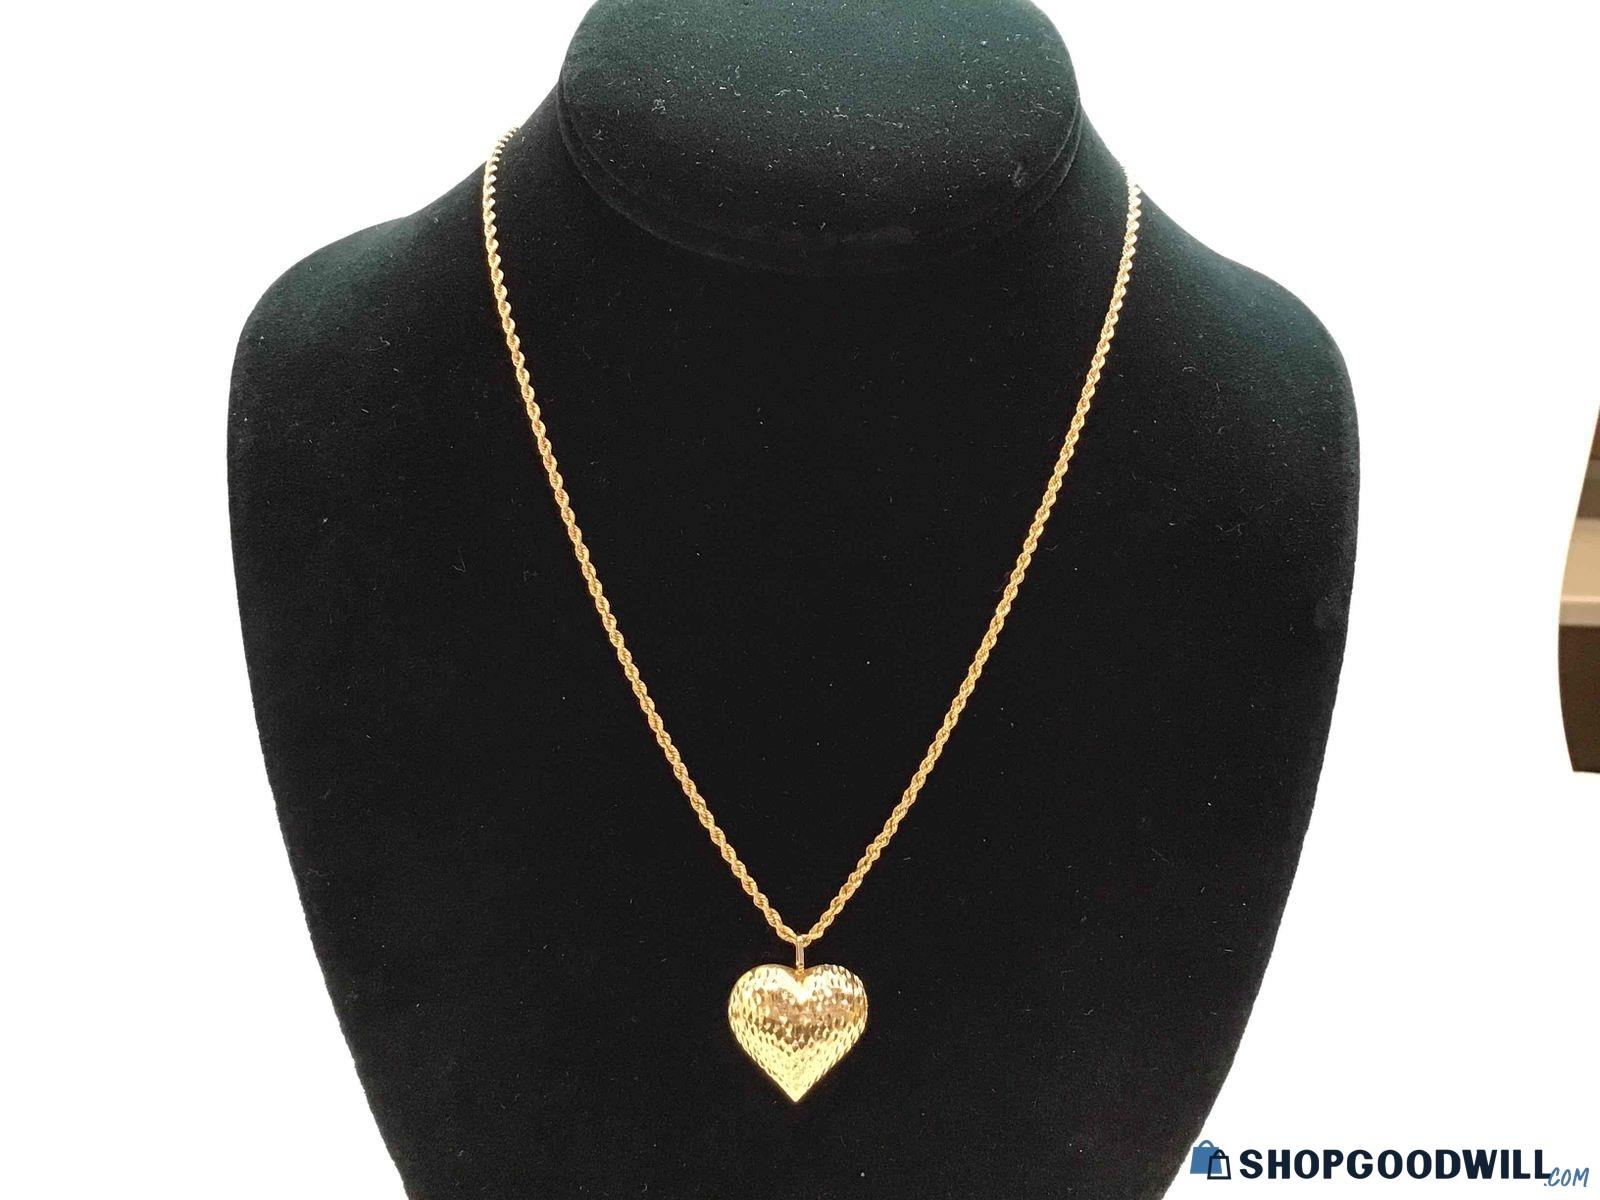 14K Gold Rope Chain with Heart Pendant 7.1g - shopgoodwill.com